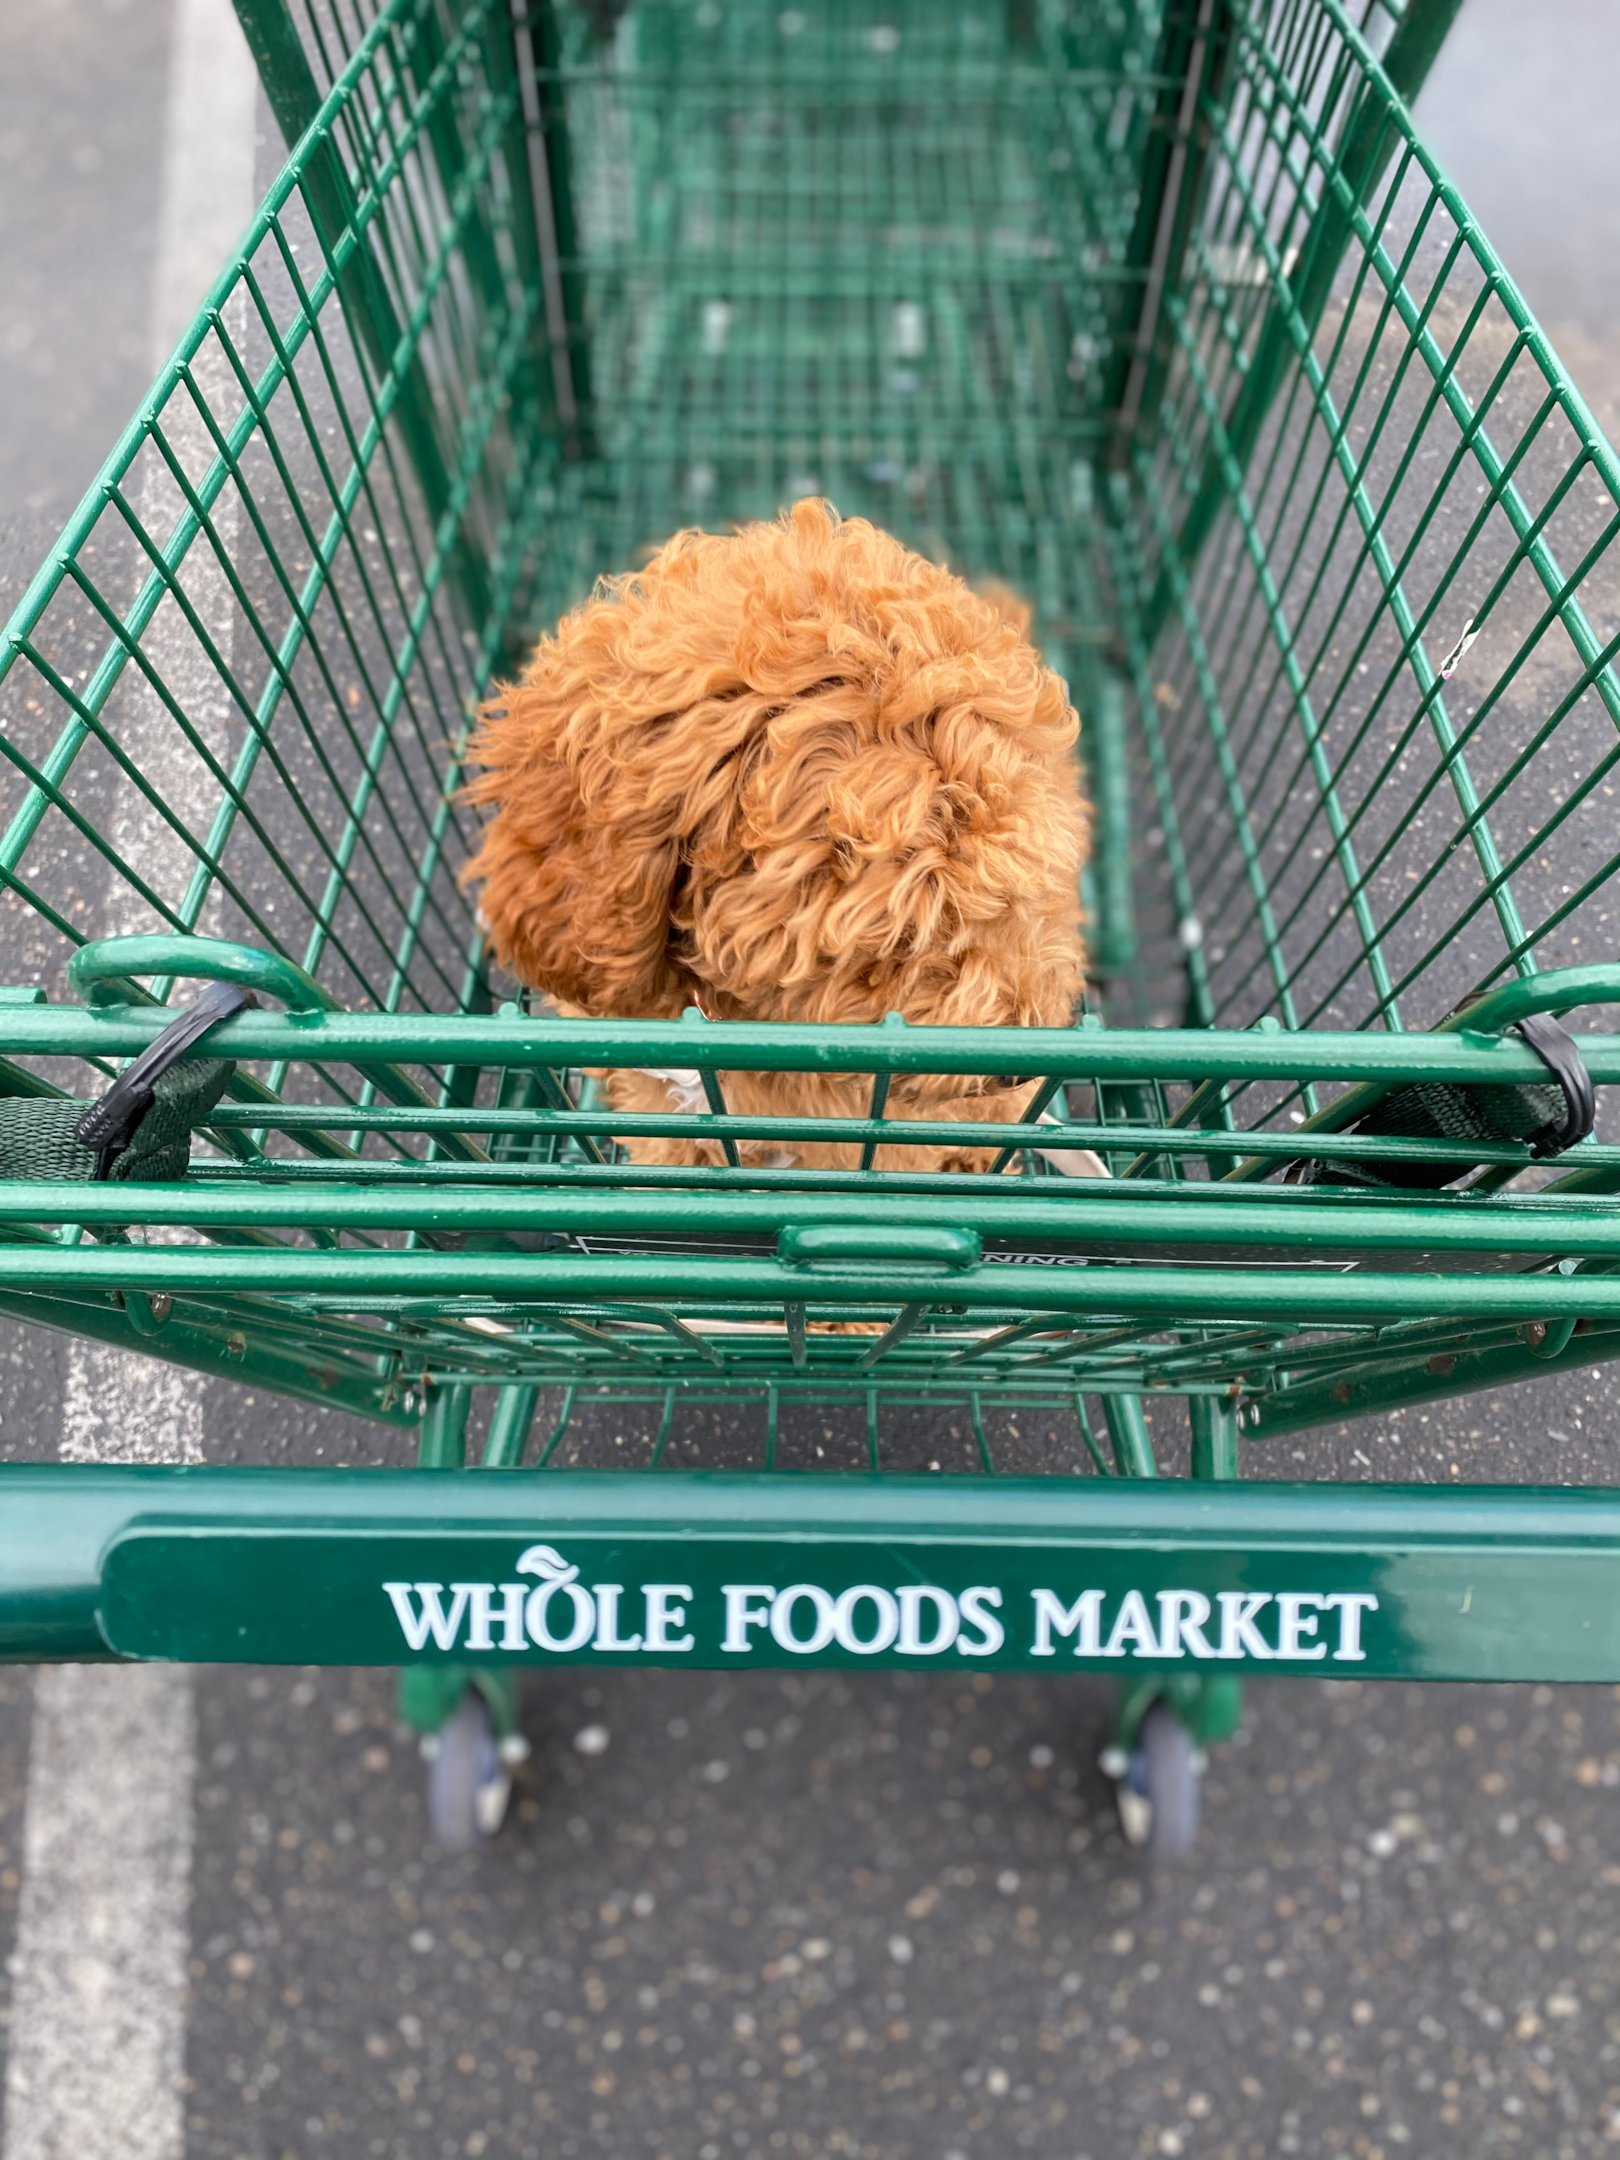 Shopping cart at Whole Foods market with a dog inside.